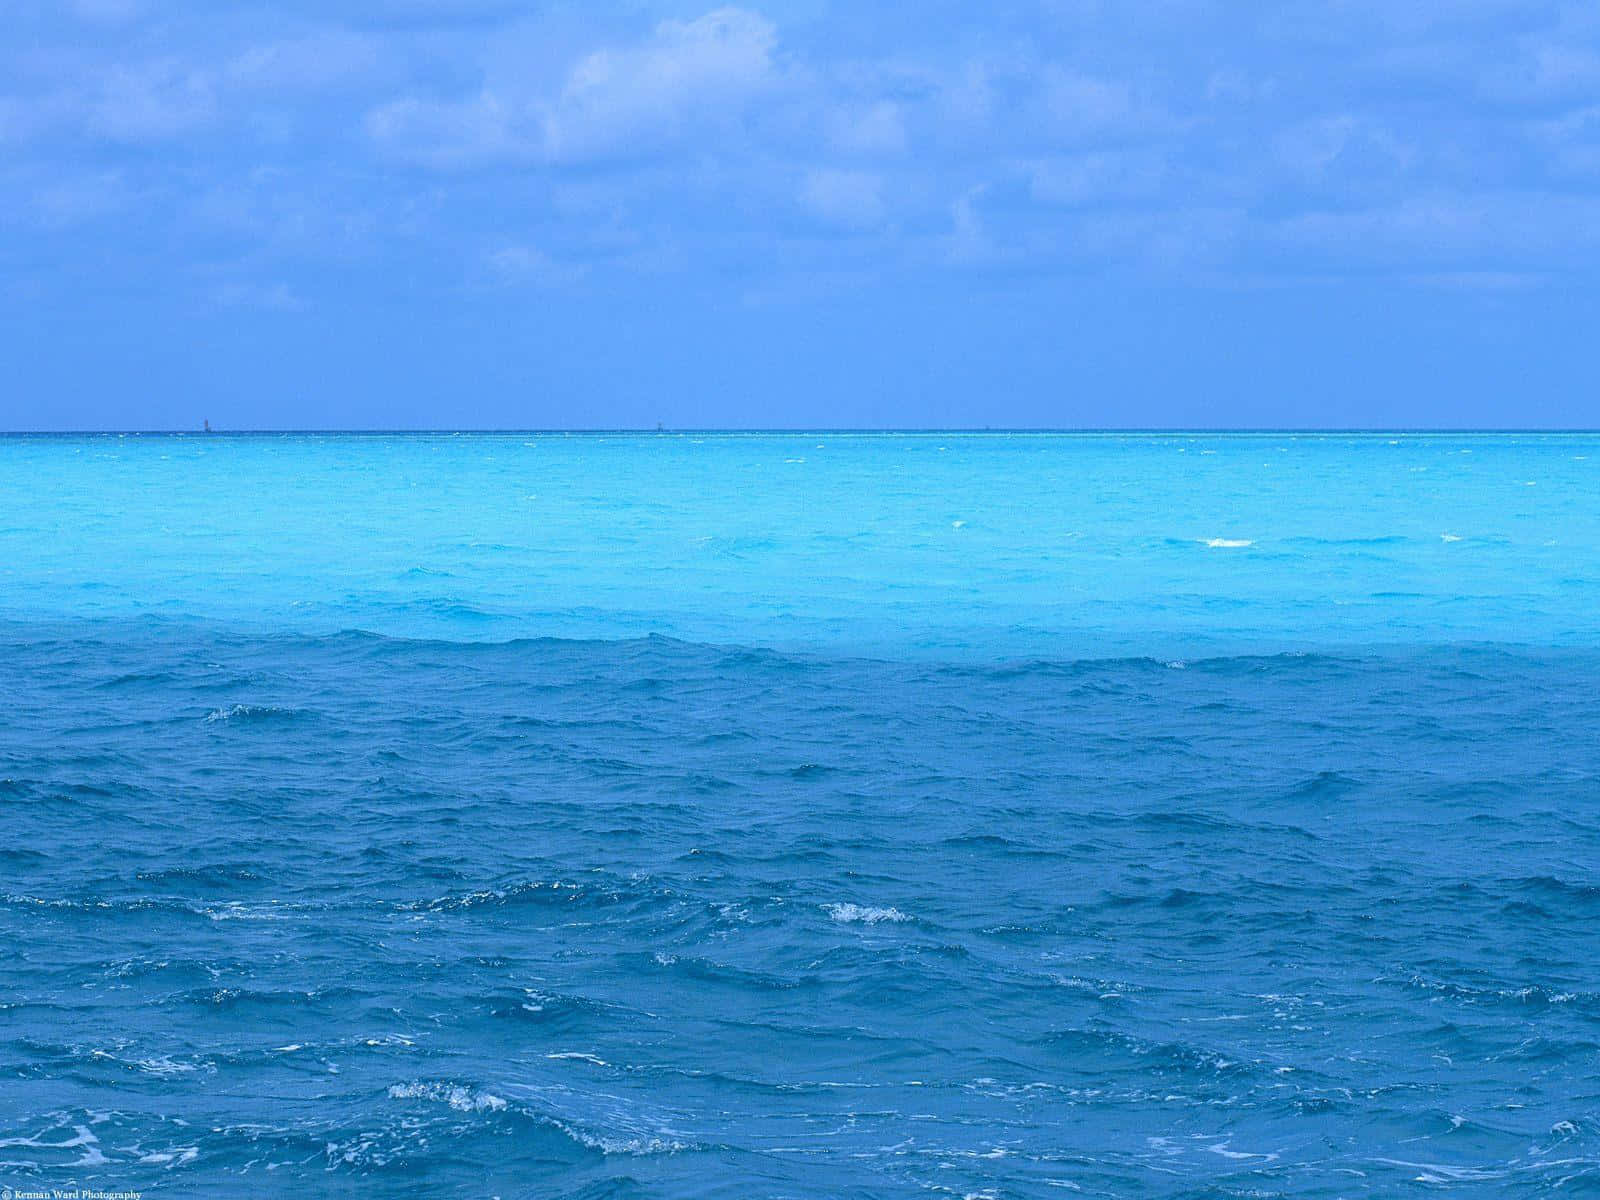 Feel the power of the ocean with this bright blue background.